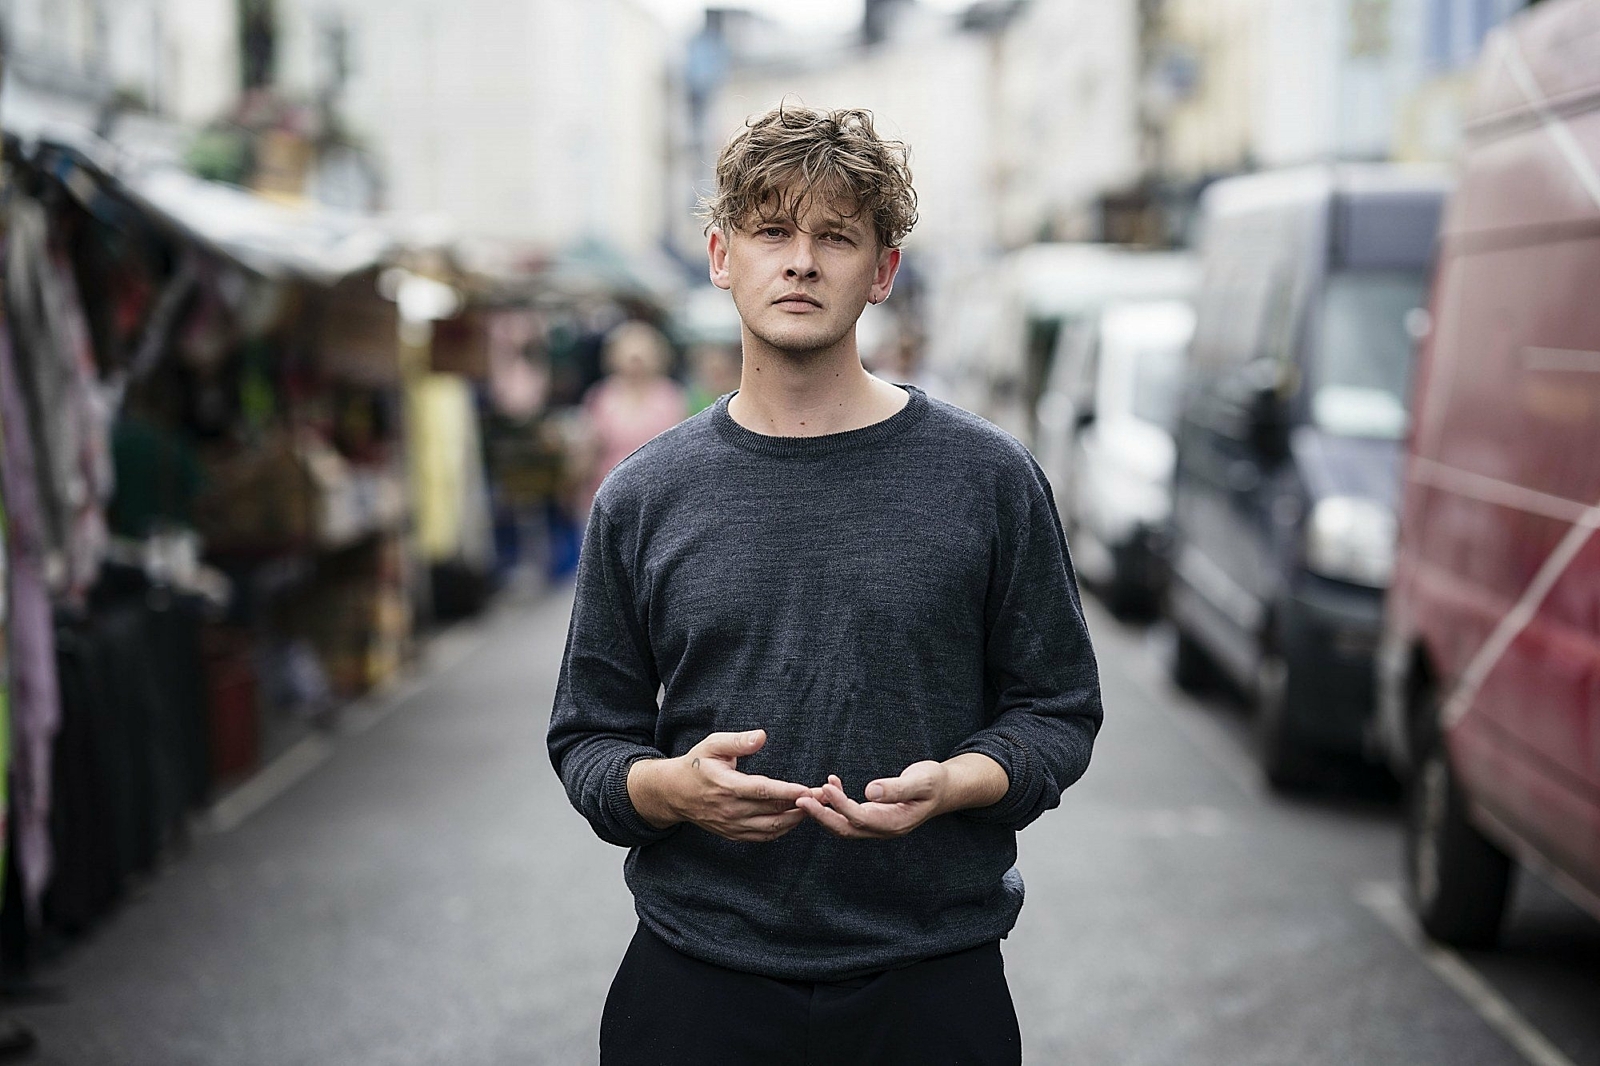 Bill Ryder-Jones on weighty new LP 'Yawn': “It's a really good time for  people to hear musicians being honest” • Interview • DIY Magazine